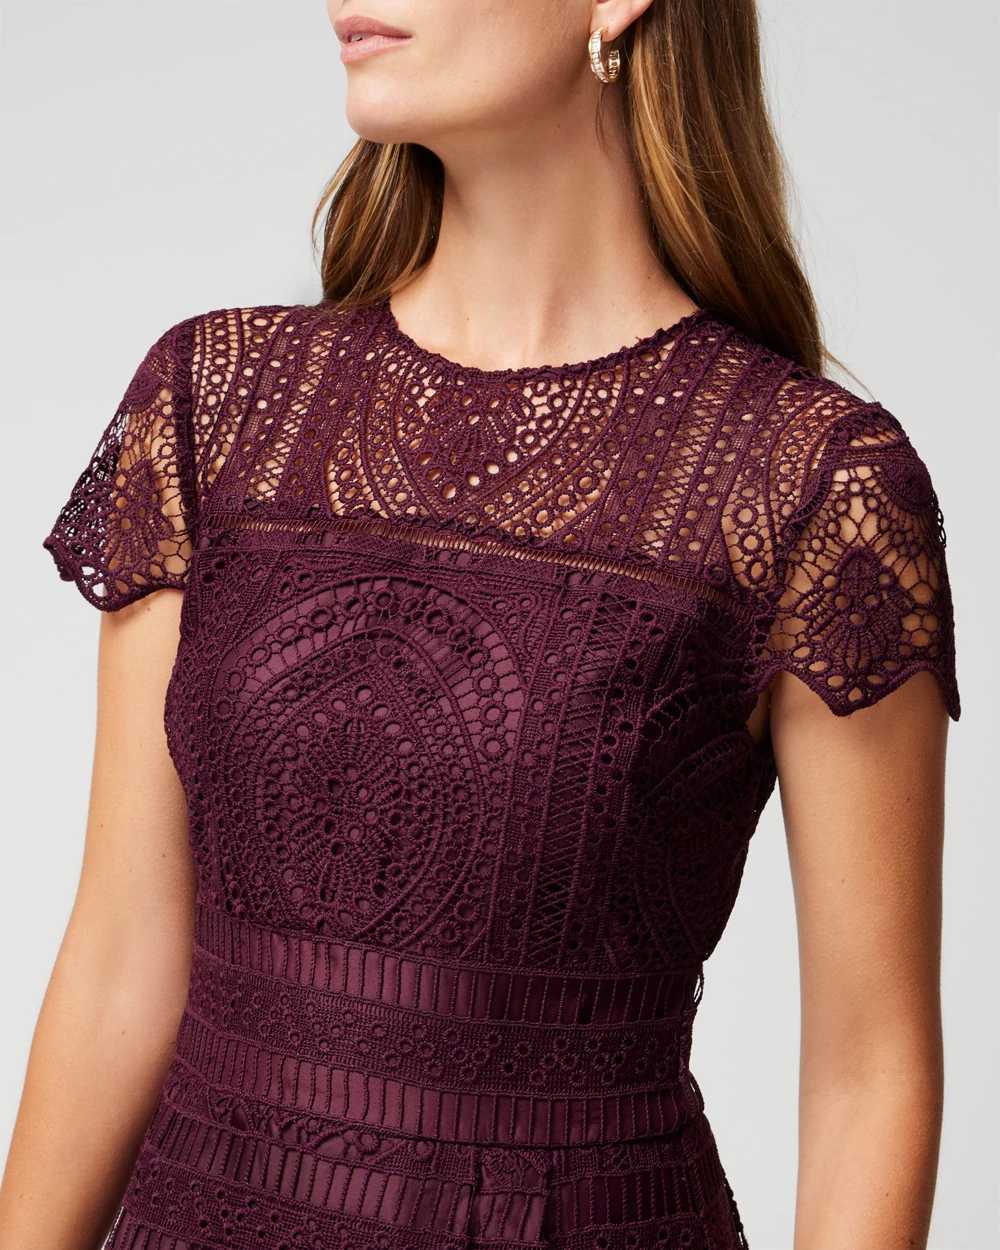 Petite Embroidered Lace Fit & Flare Dress click to view larger image.